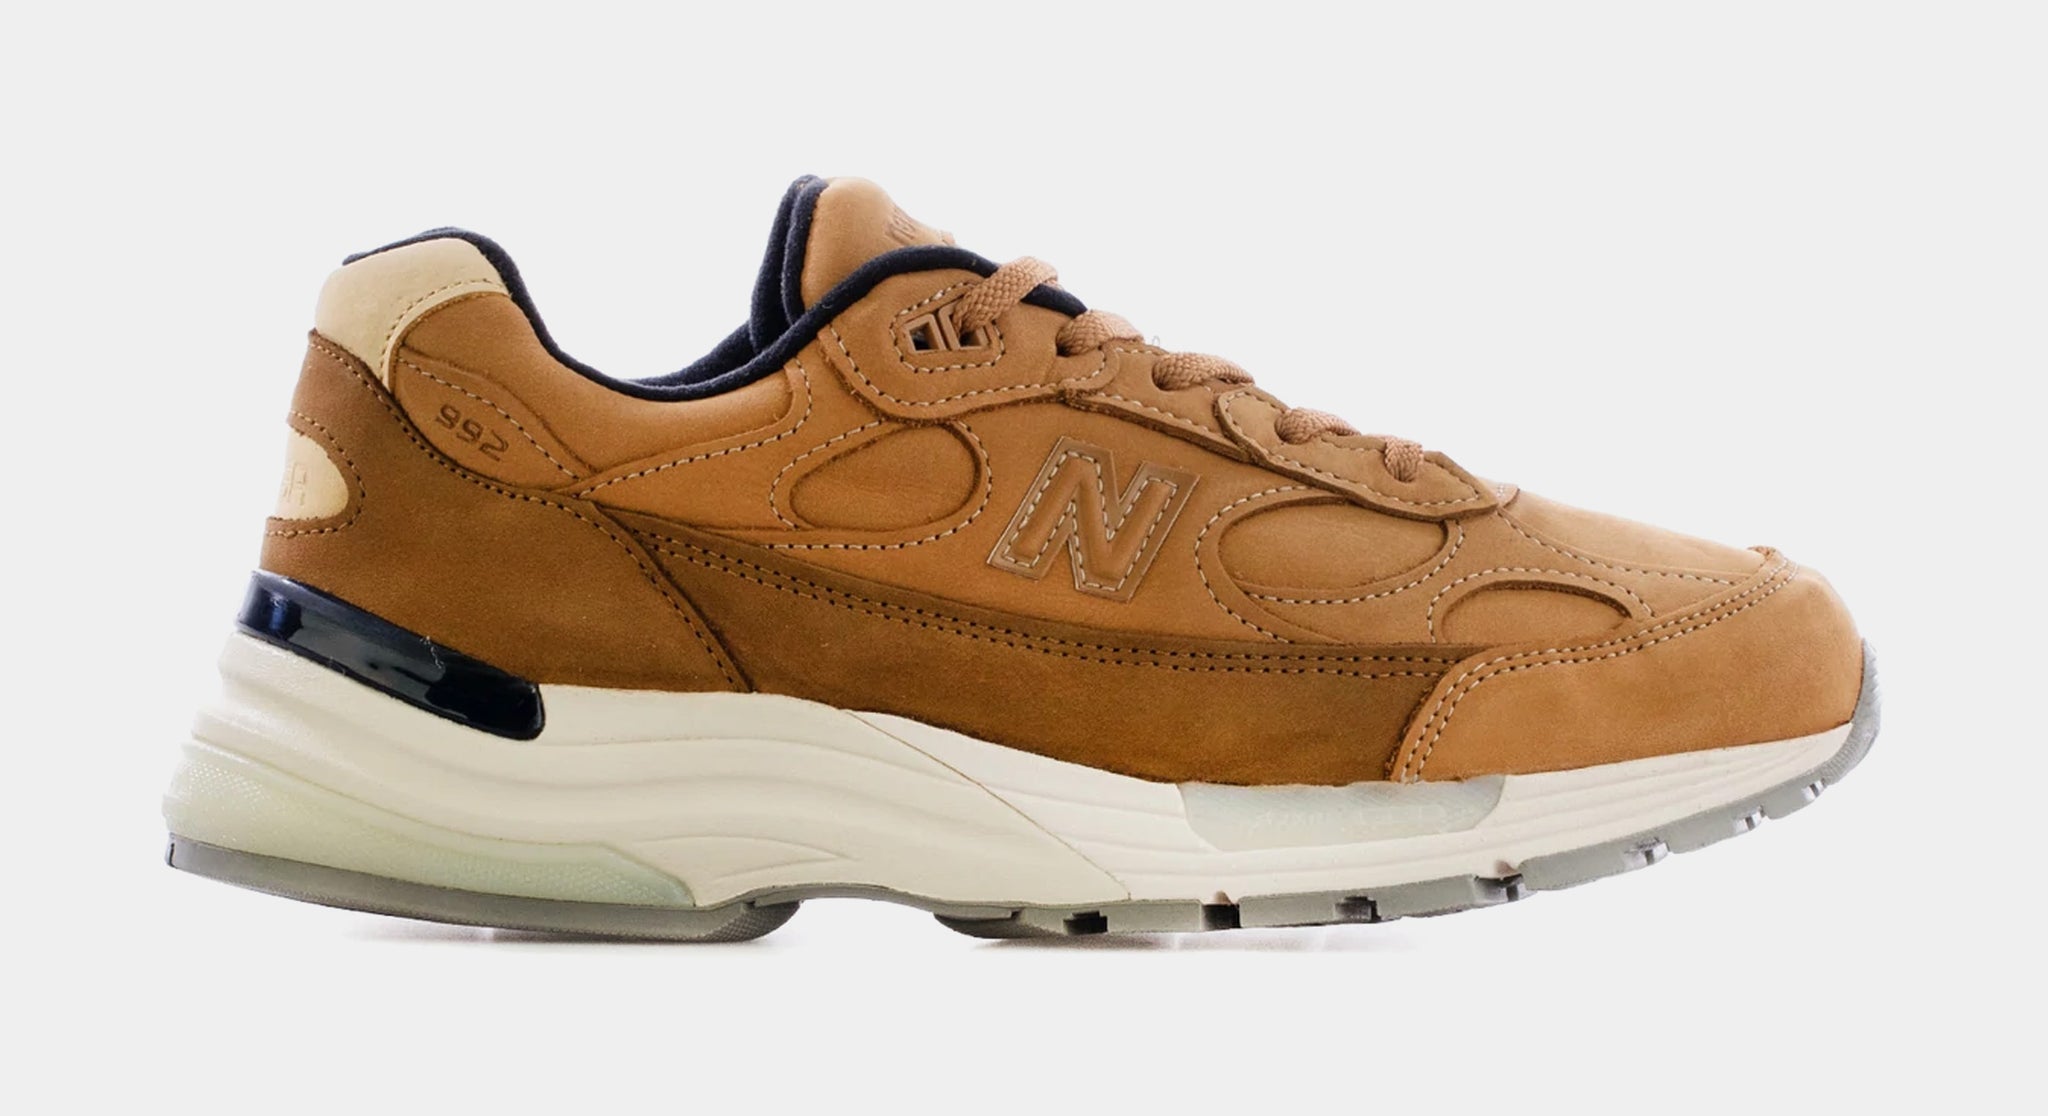 New Balance Made In Usa 992 Mens Shoes Brown Tan Beige – Shoe